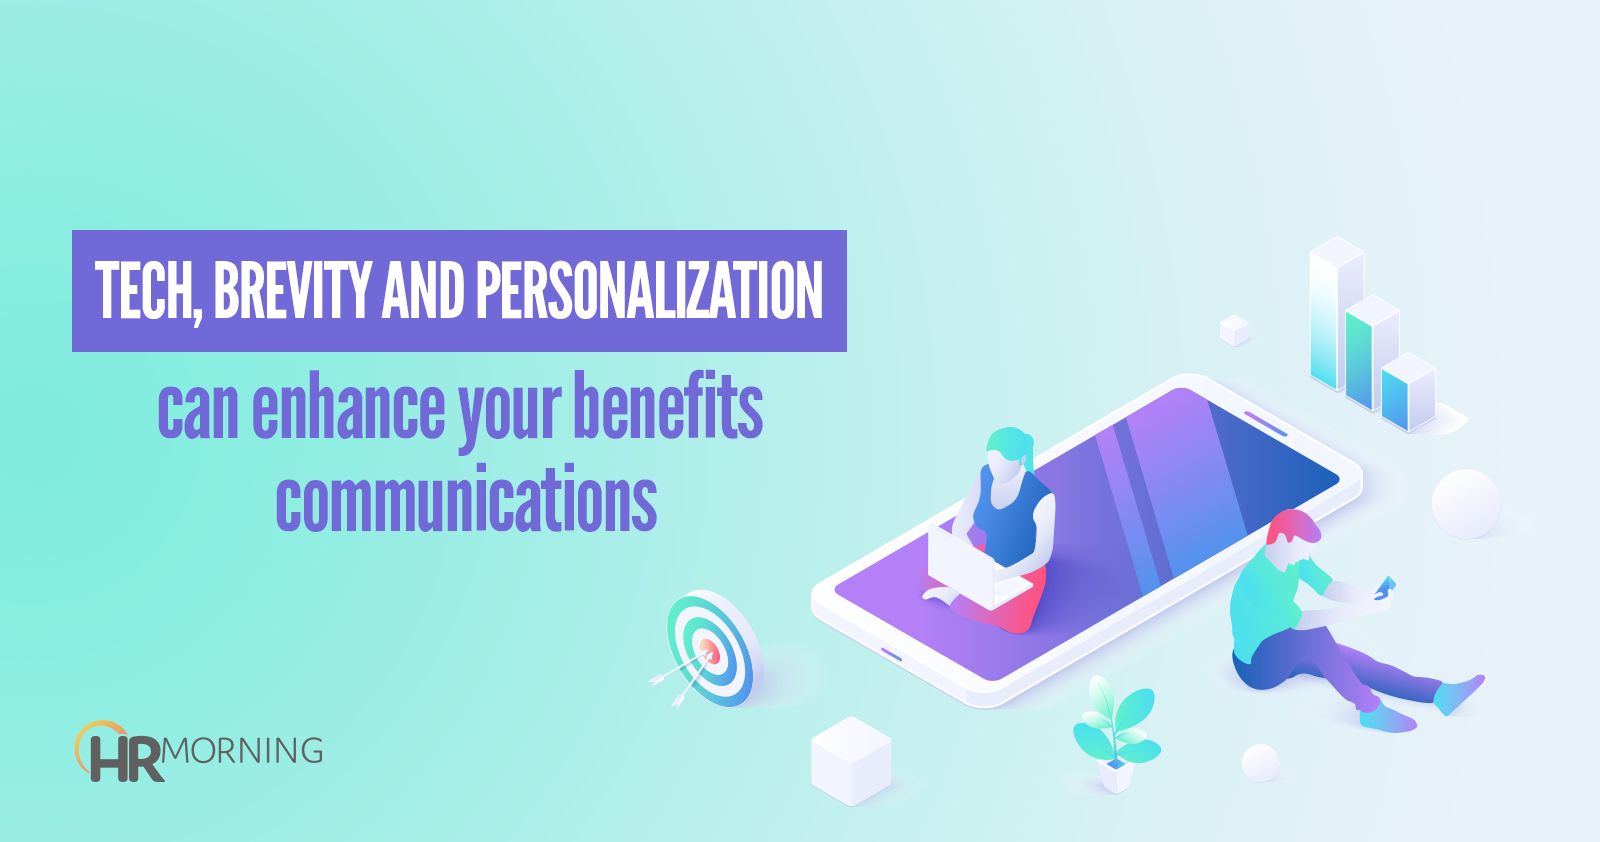 tech brevity and personalization can enhance your benefits communications